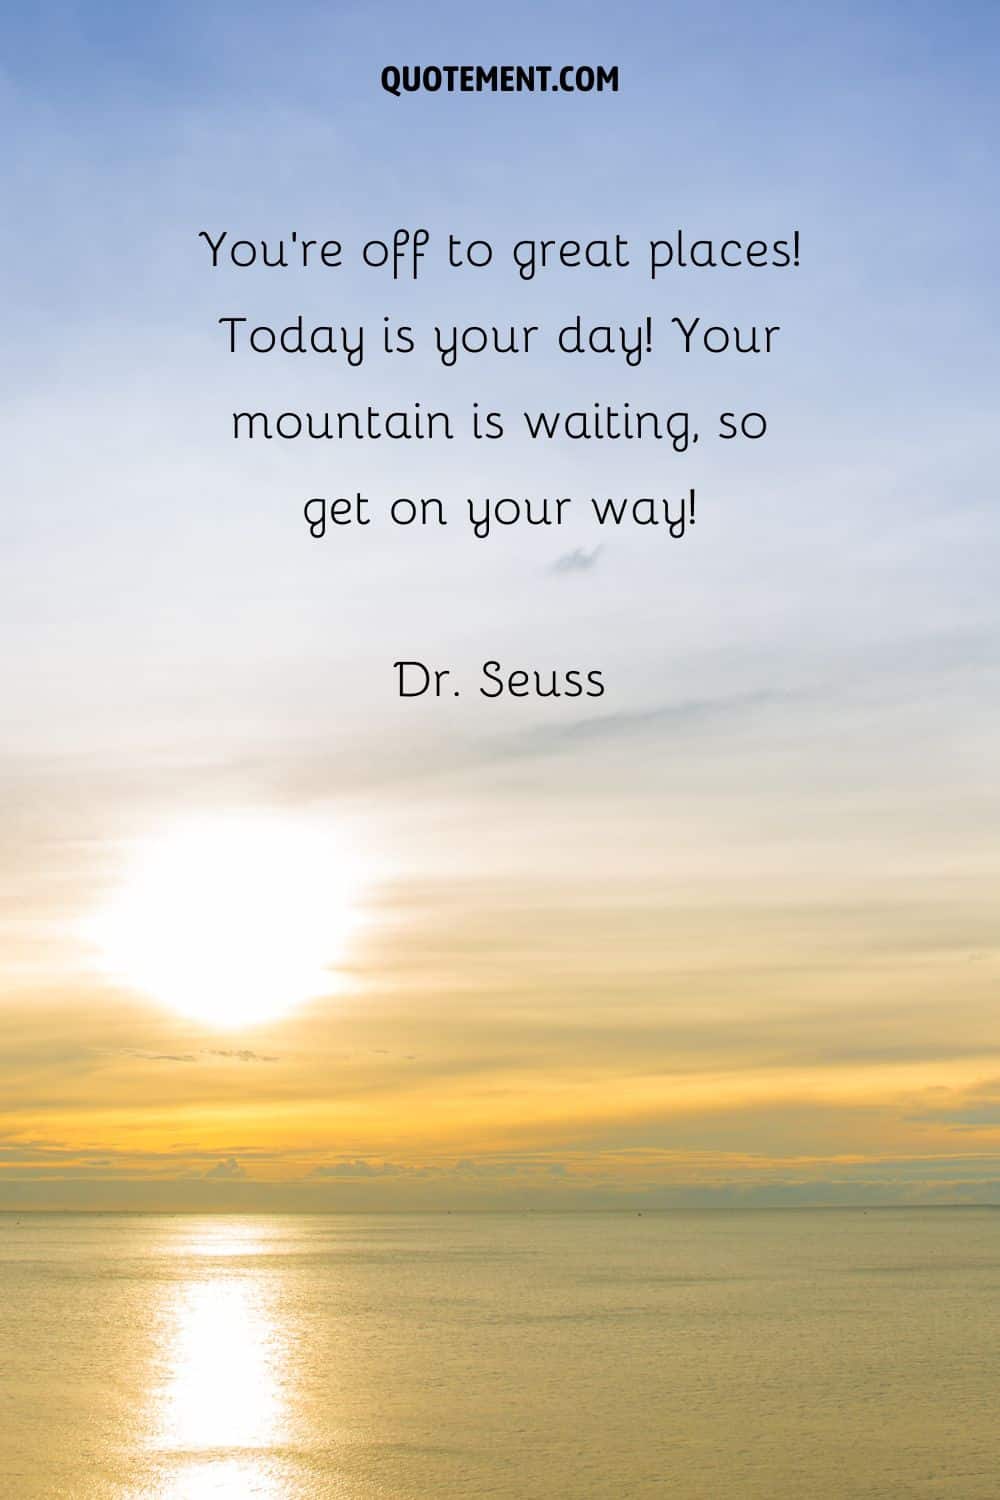 “You’re off to great places! Today is your day! Your mountain is waiting, so get on your way!” — Dr. Seuss